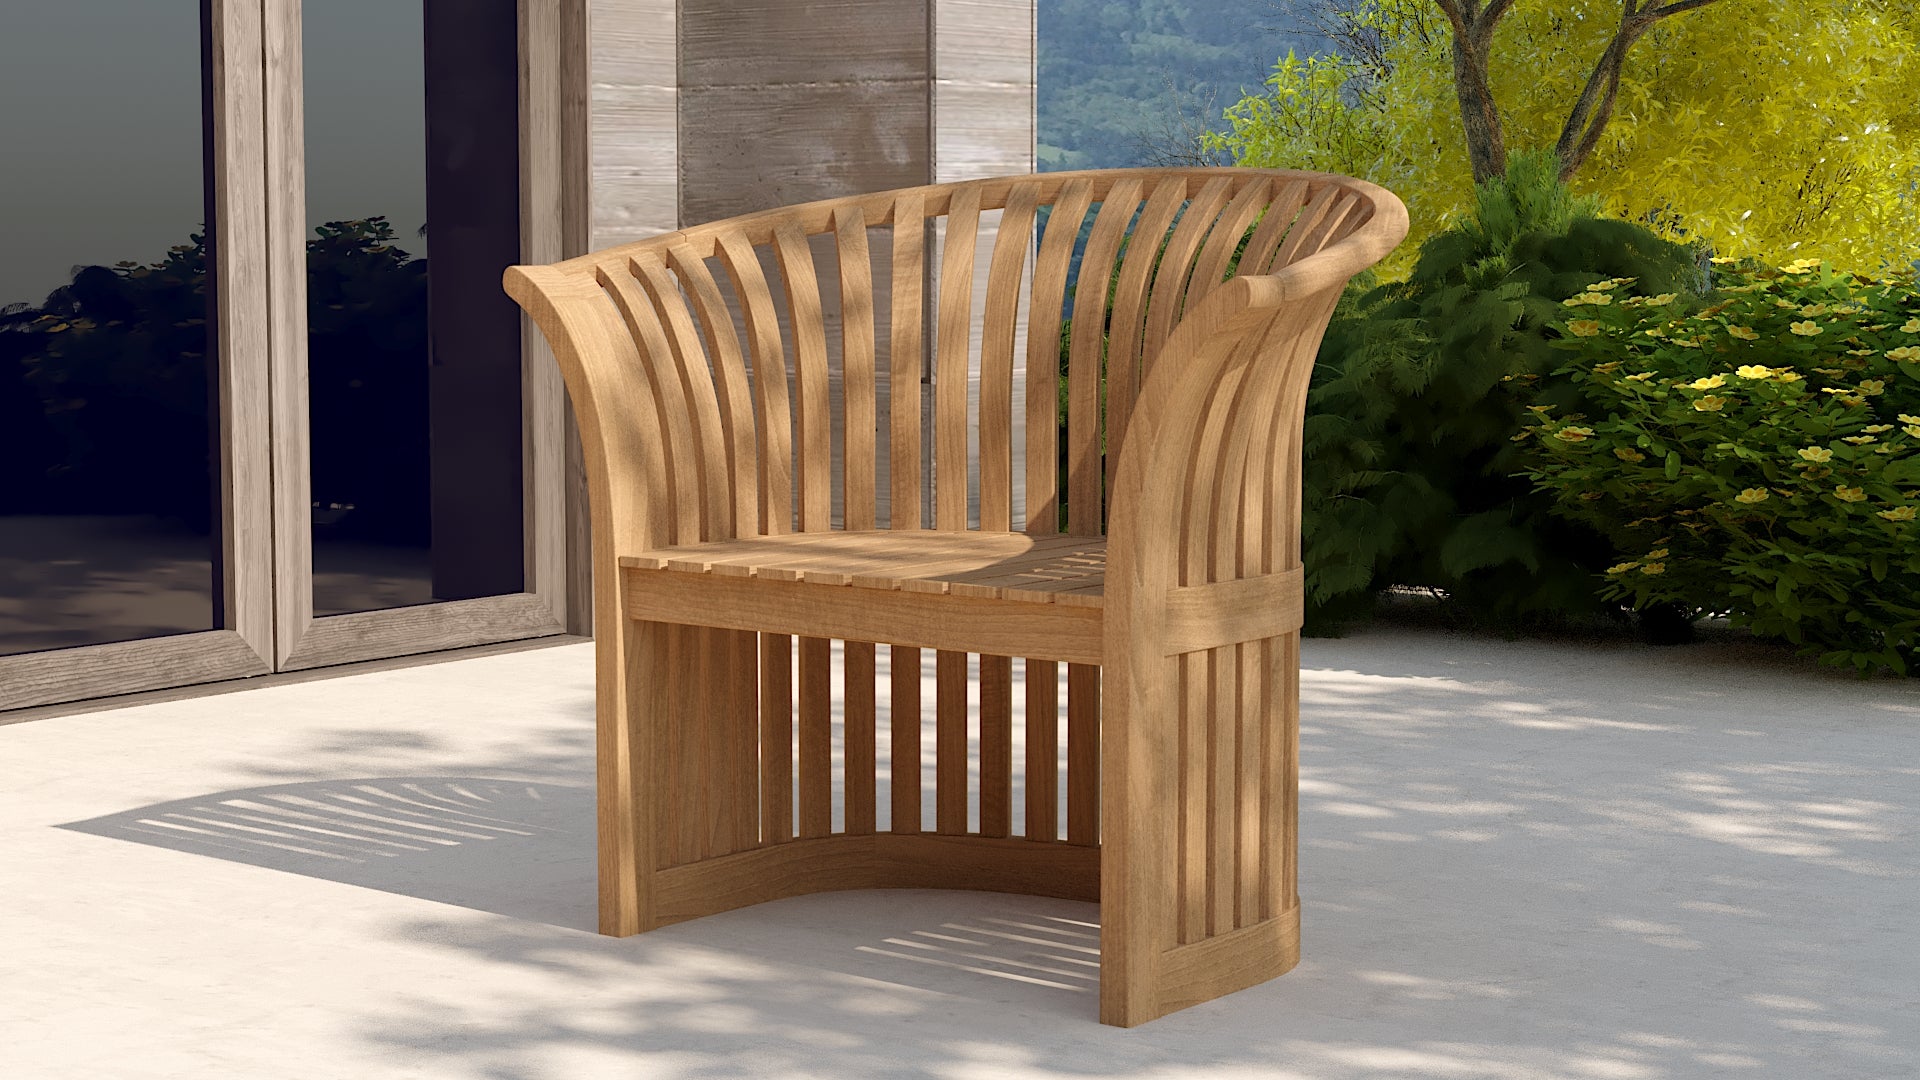 The Ascot Teak Outdoor Lounge Chair